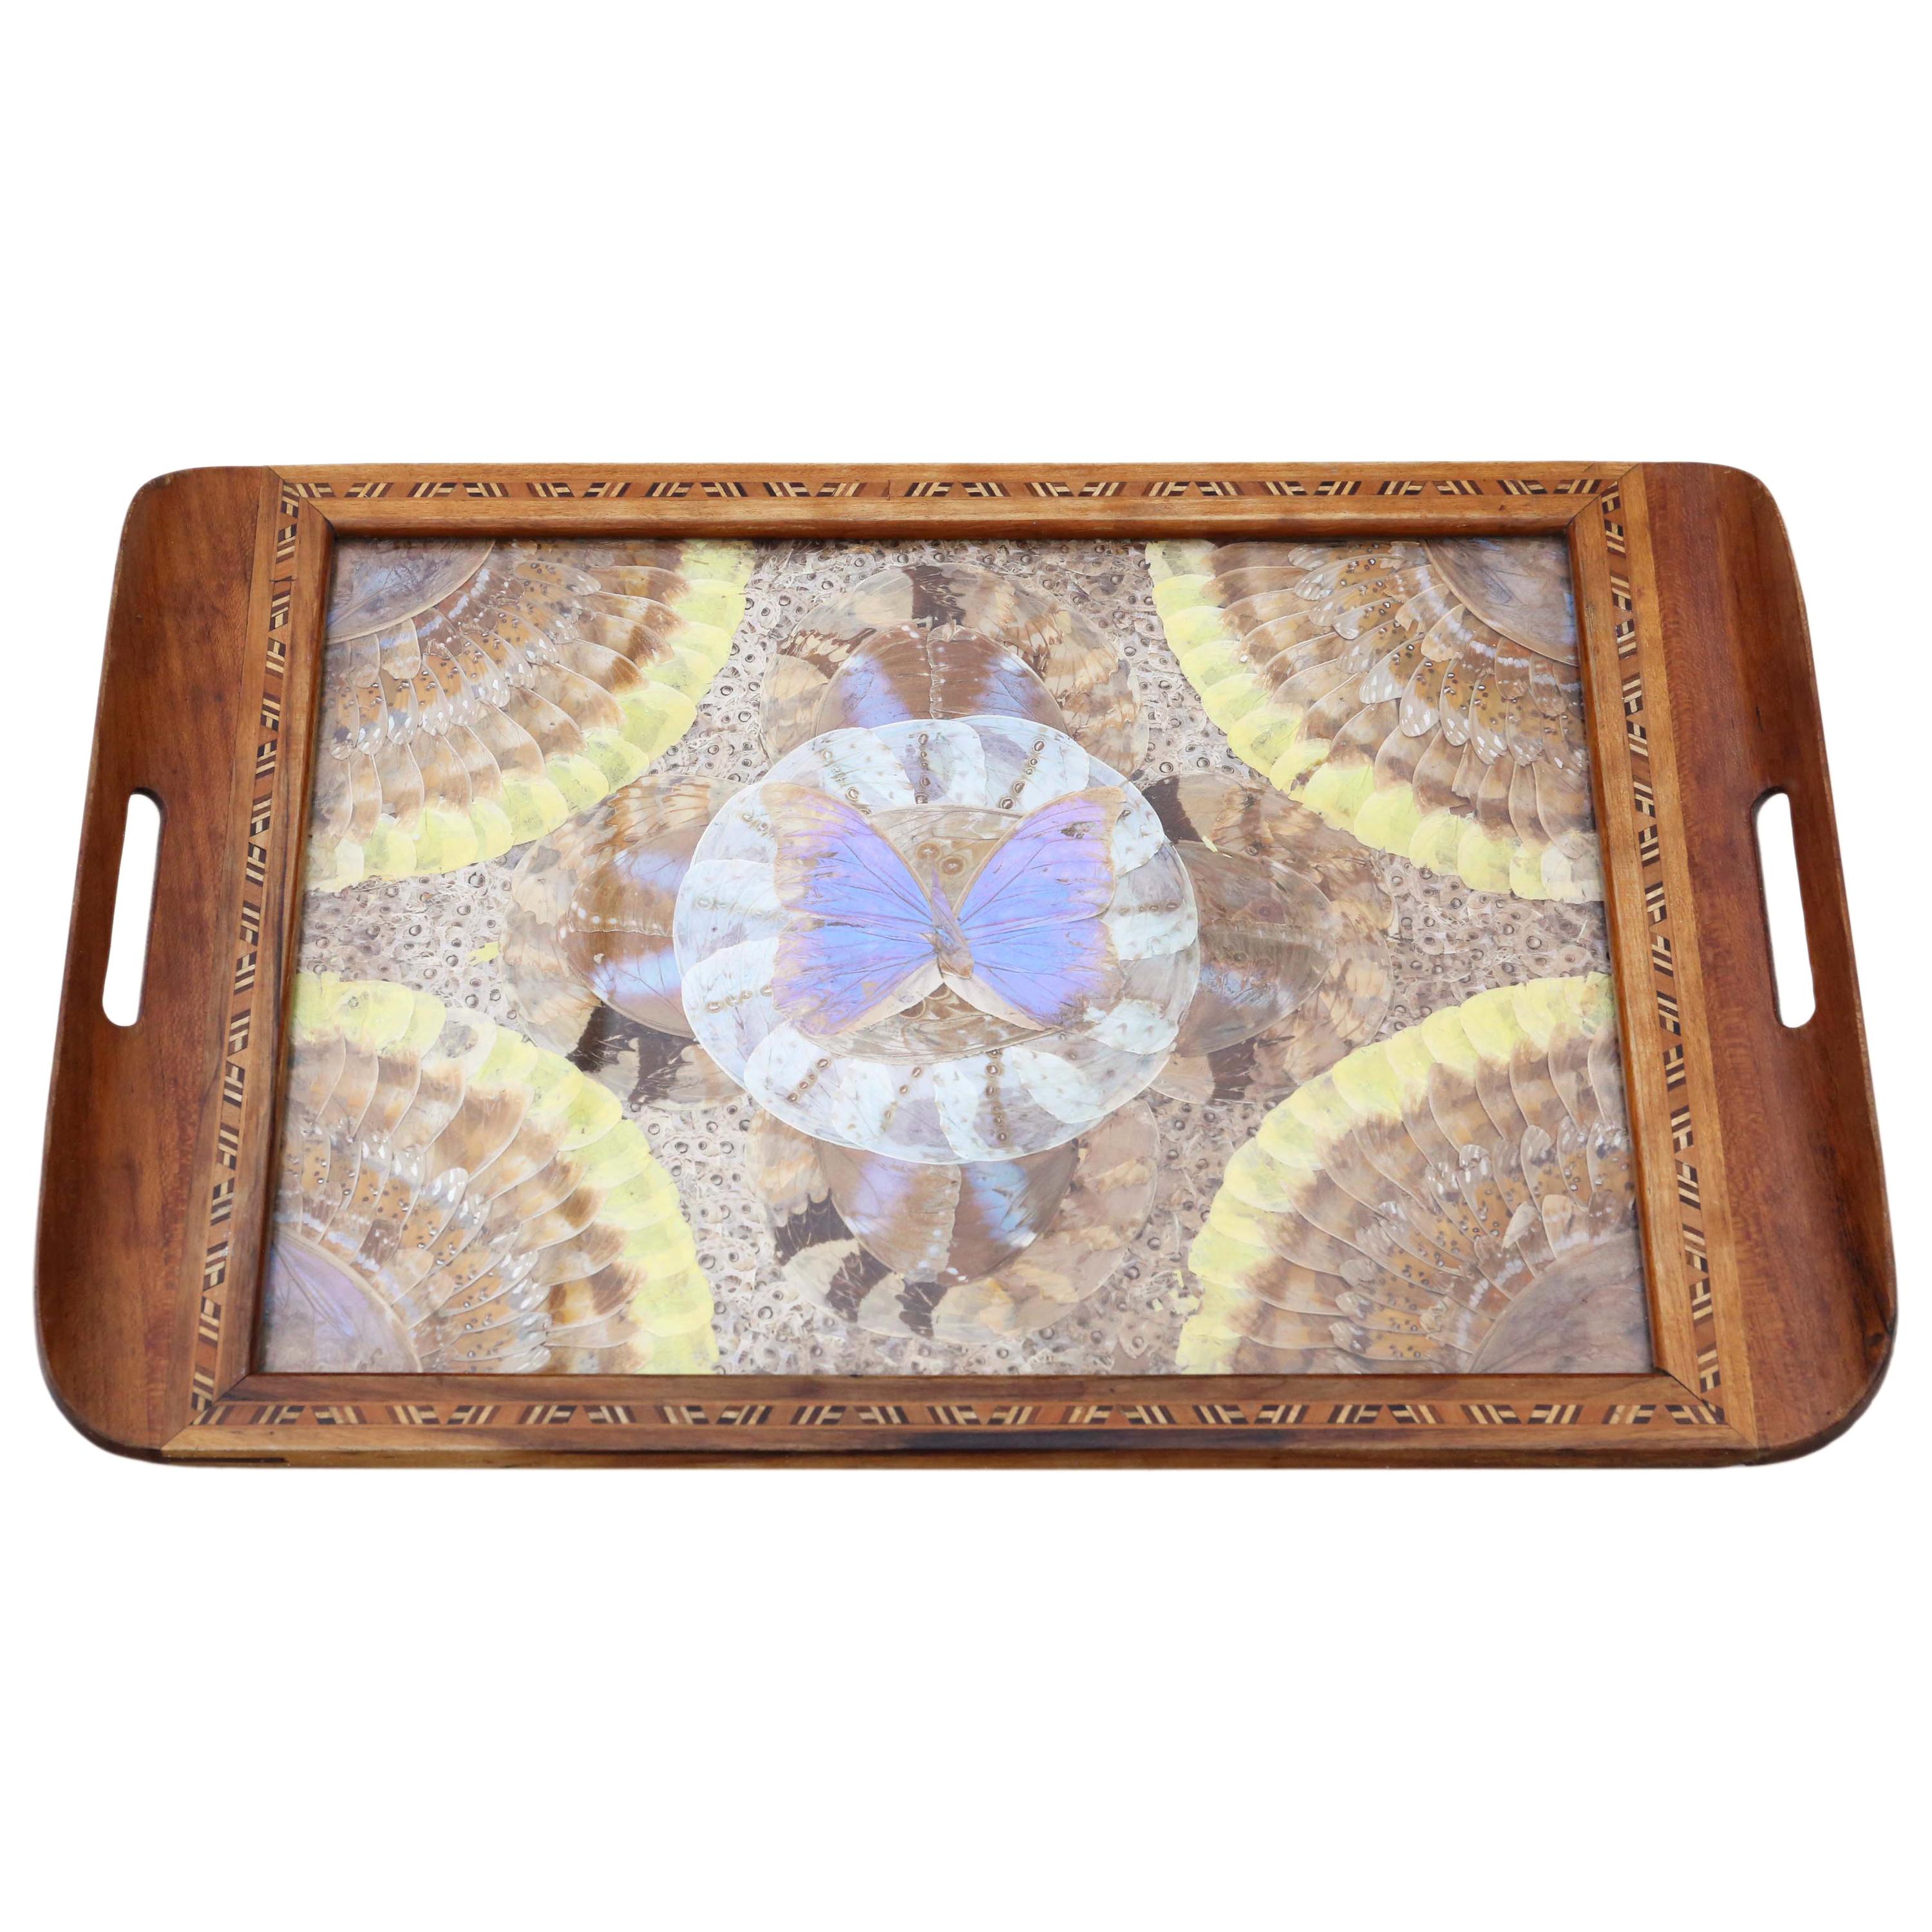 Antique Inlaid Tunbridge Ware Butterfly Serving Tray, circa 1920